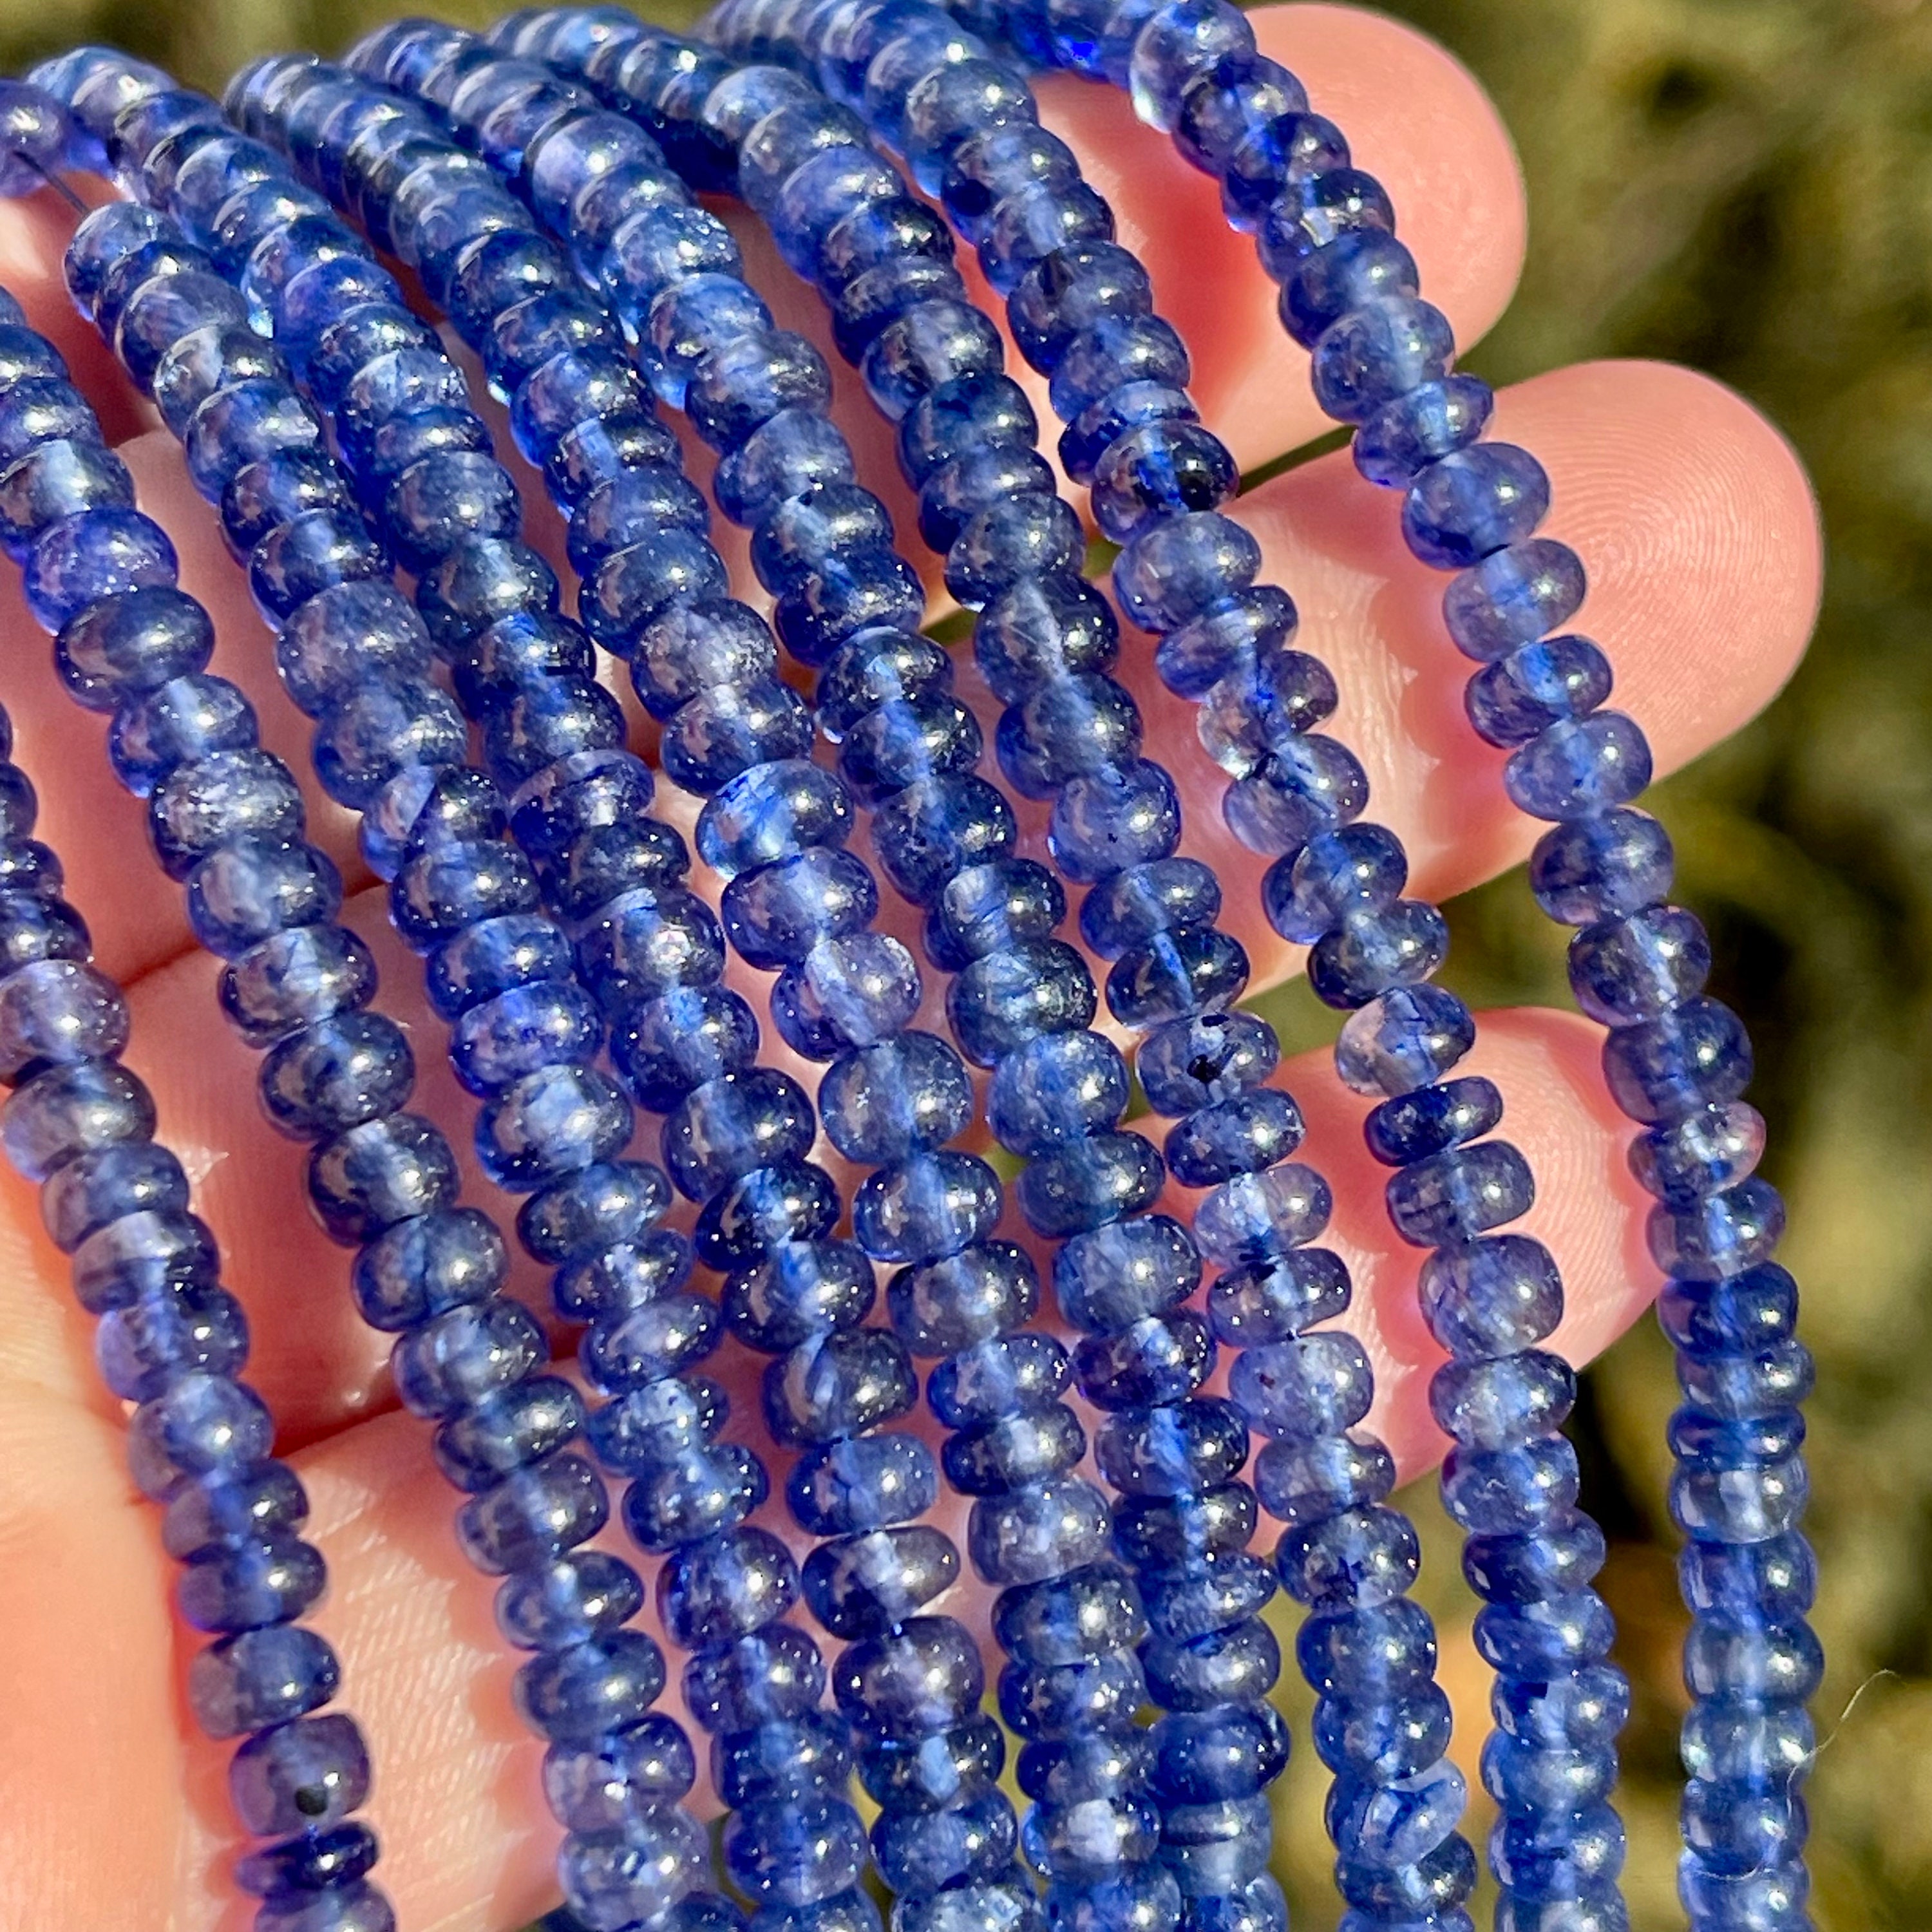 6mm Sapphire Blue Beads for Jewelry Making, Azure Blue Beads for Bracelet,  Glass Beads, Bright Blue Beads, Persian Blue Tie Dye Beads -  Norway